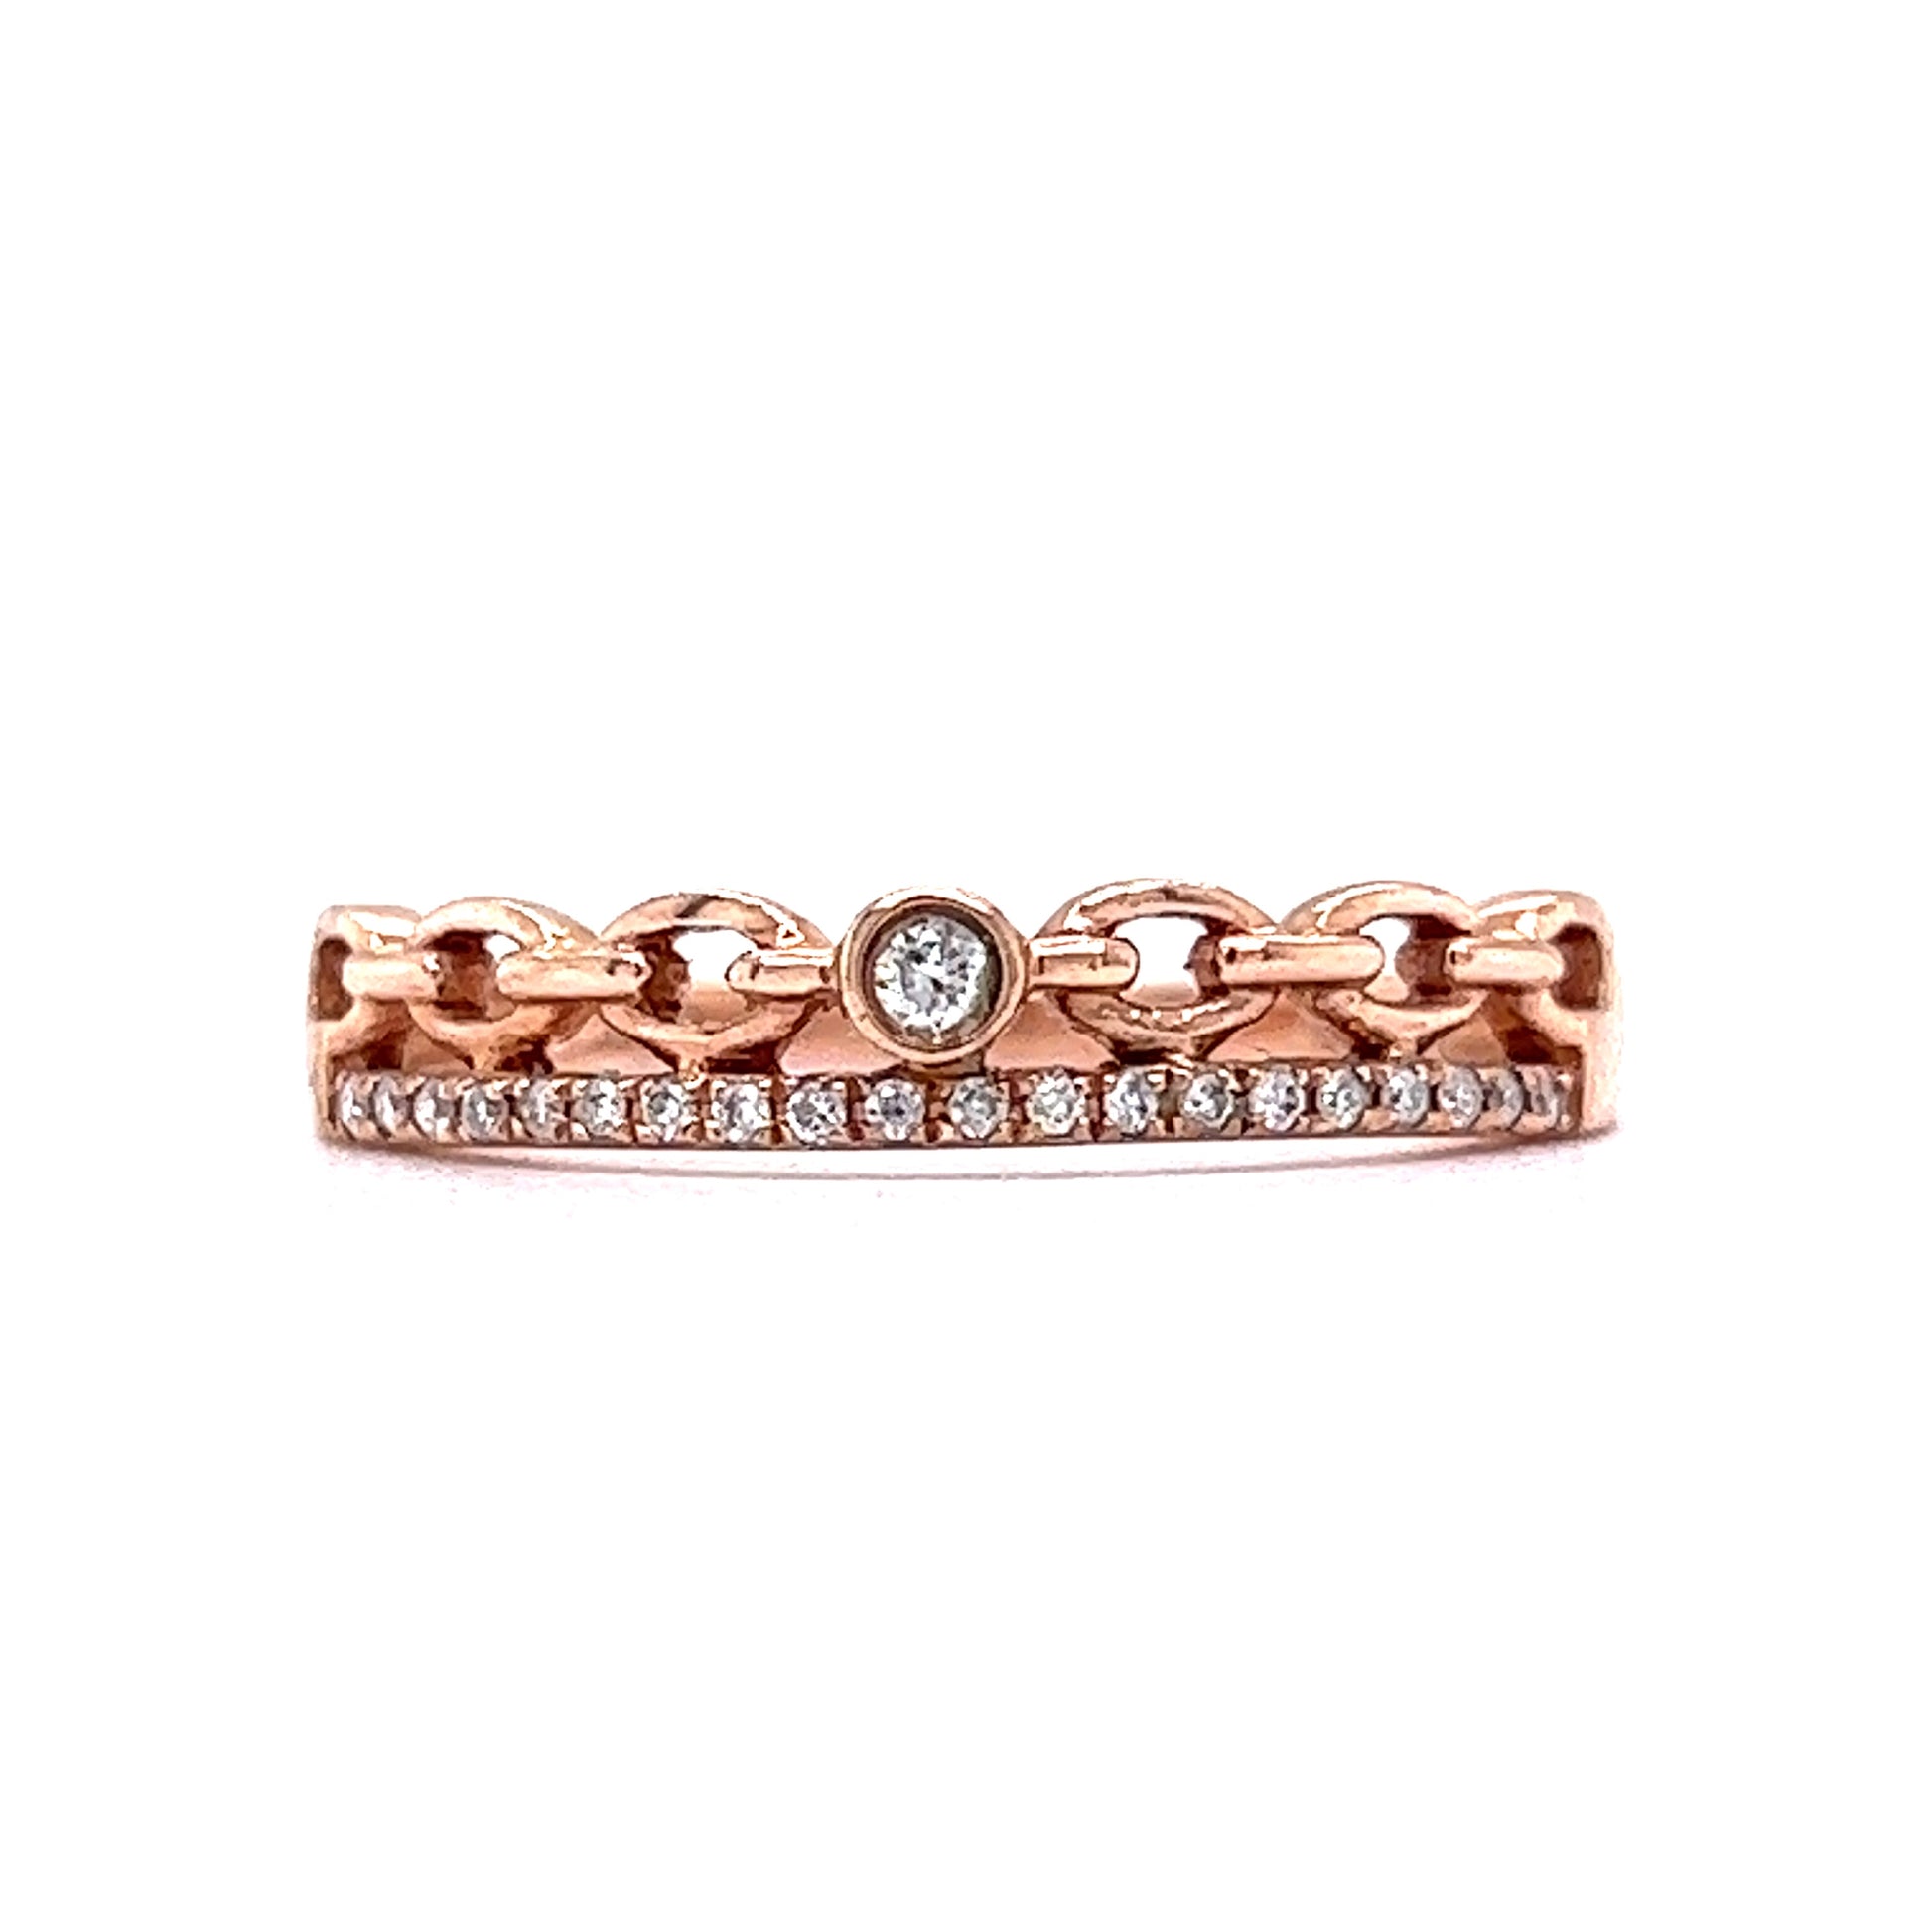 Stacked Diamond Chain Ring in 14k Rose GoldComposition: 14 Karat Rose GoldRing Size: 7Total Diamond Weight: .125 ctTotal Gram Weight: 1.8 gInscription: GND 417